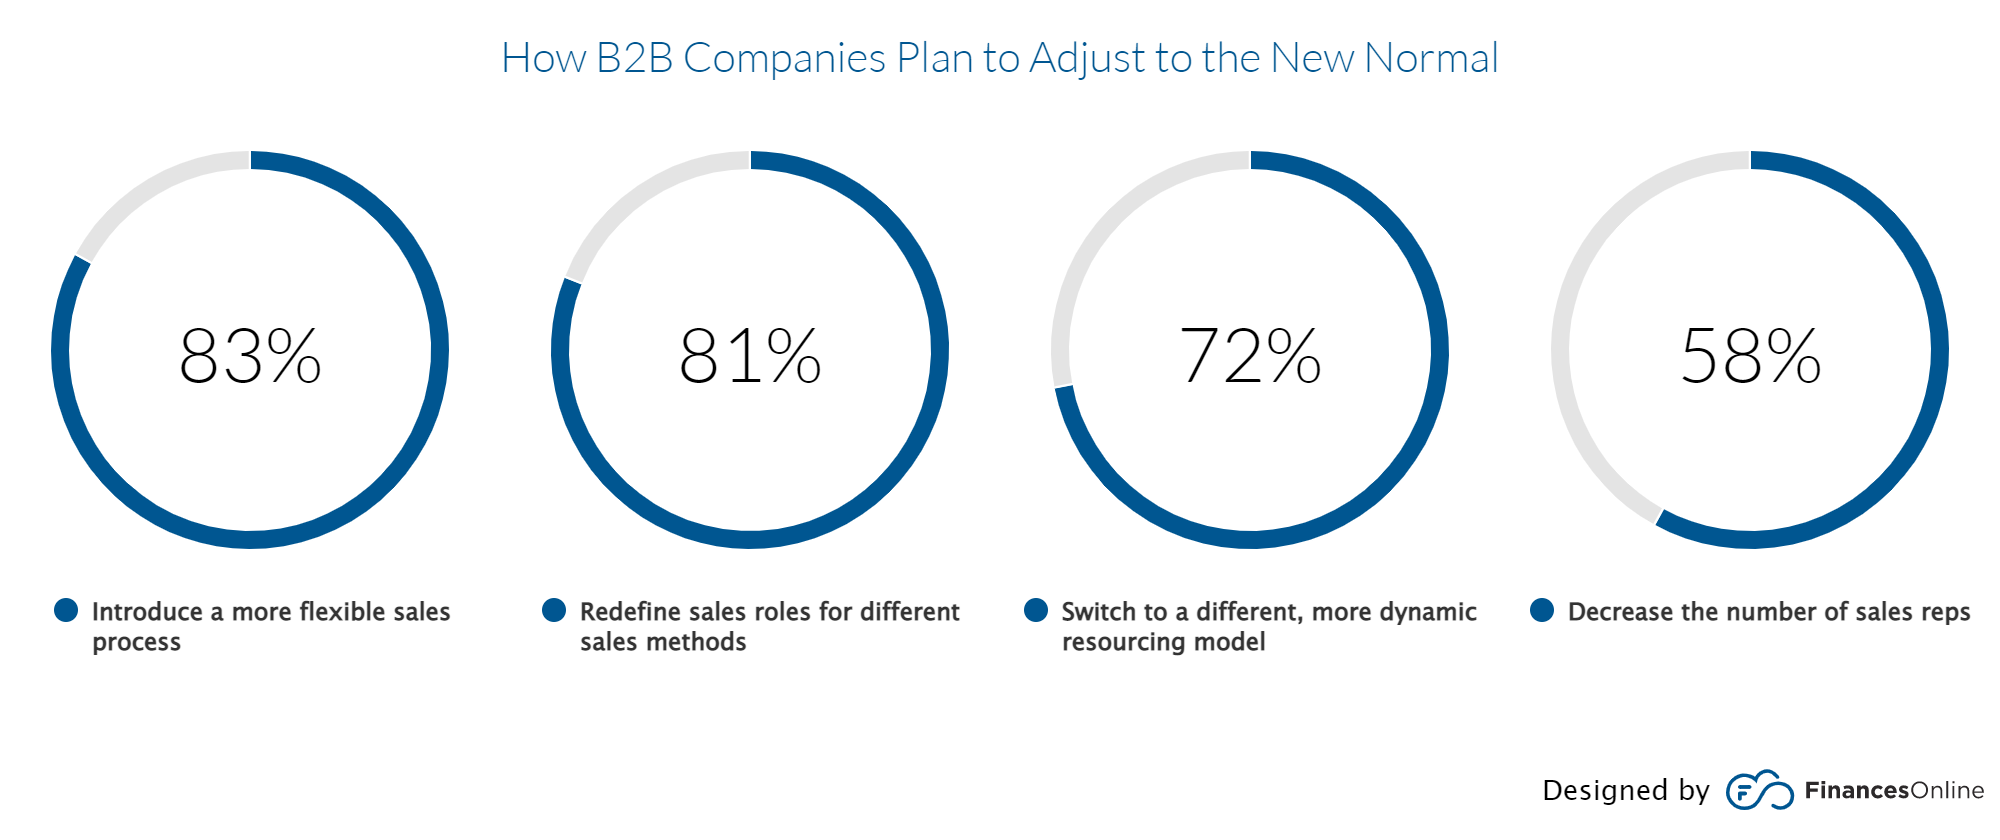 How B2B Companies Plan to Adjust to the New Normal